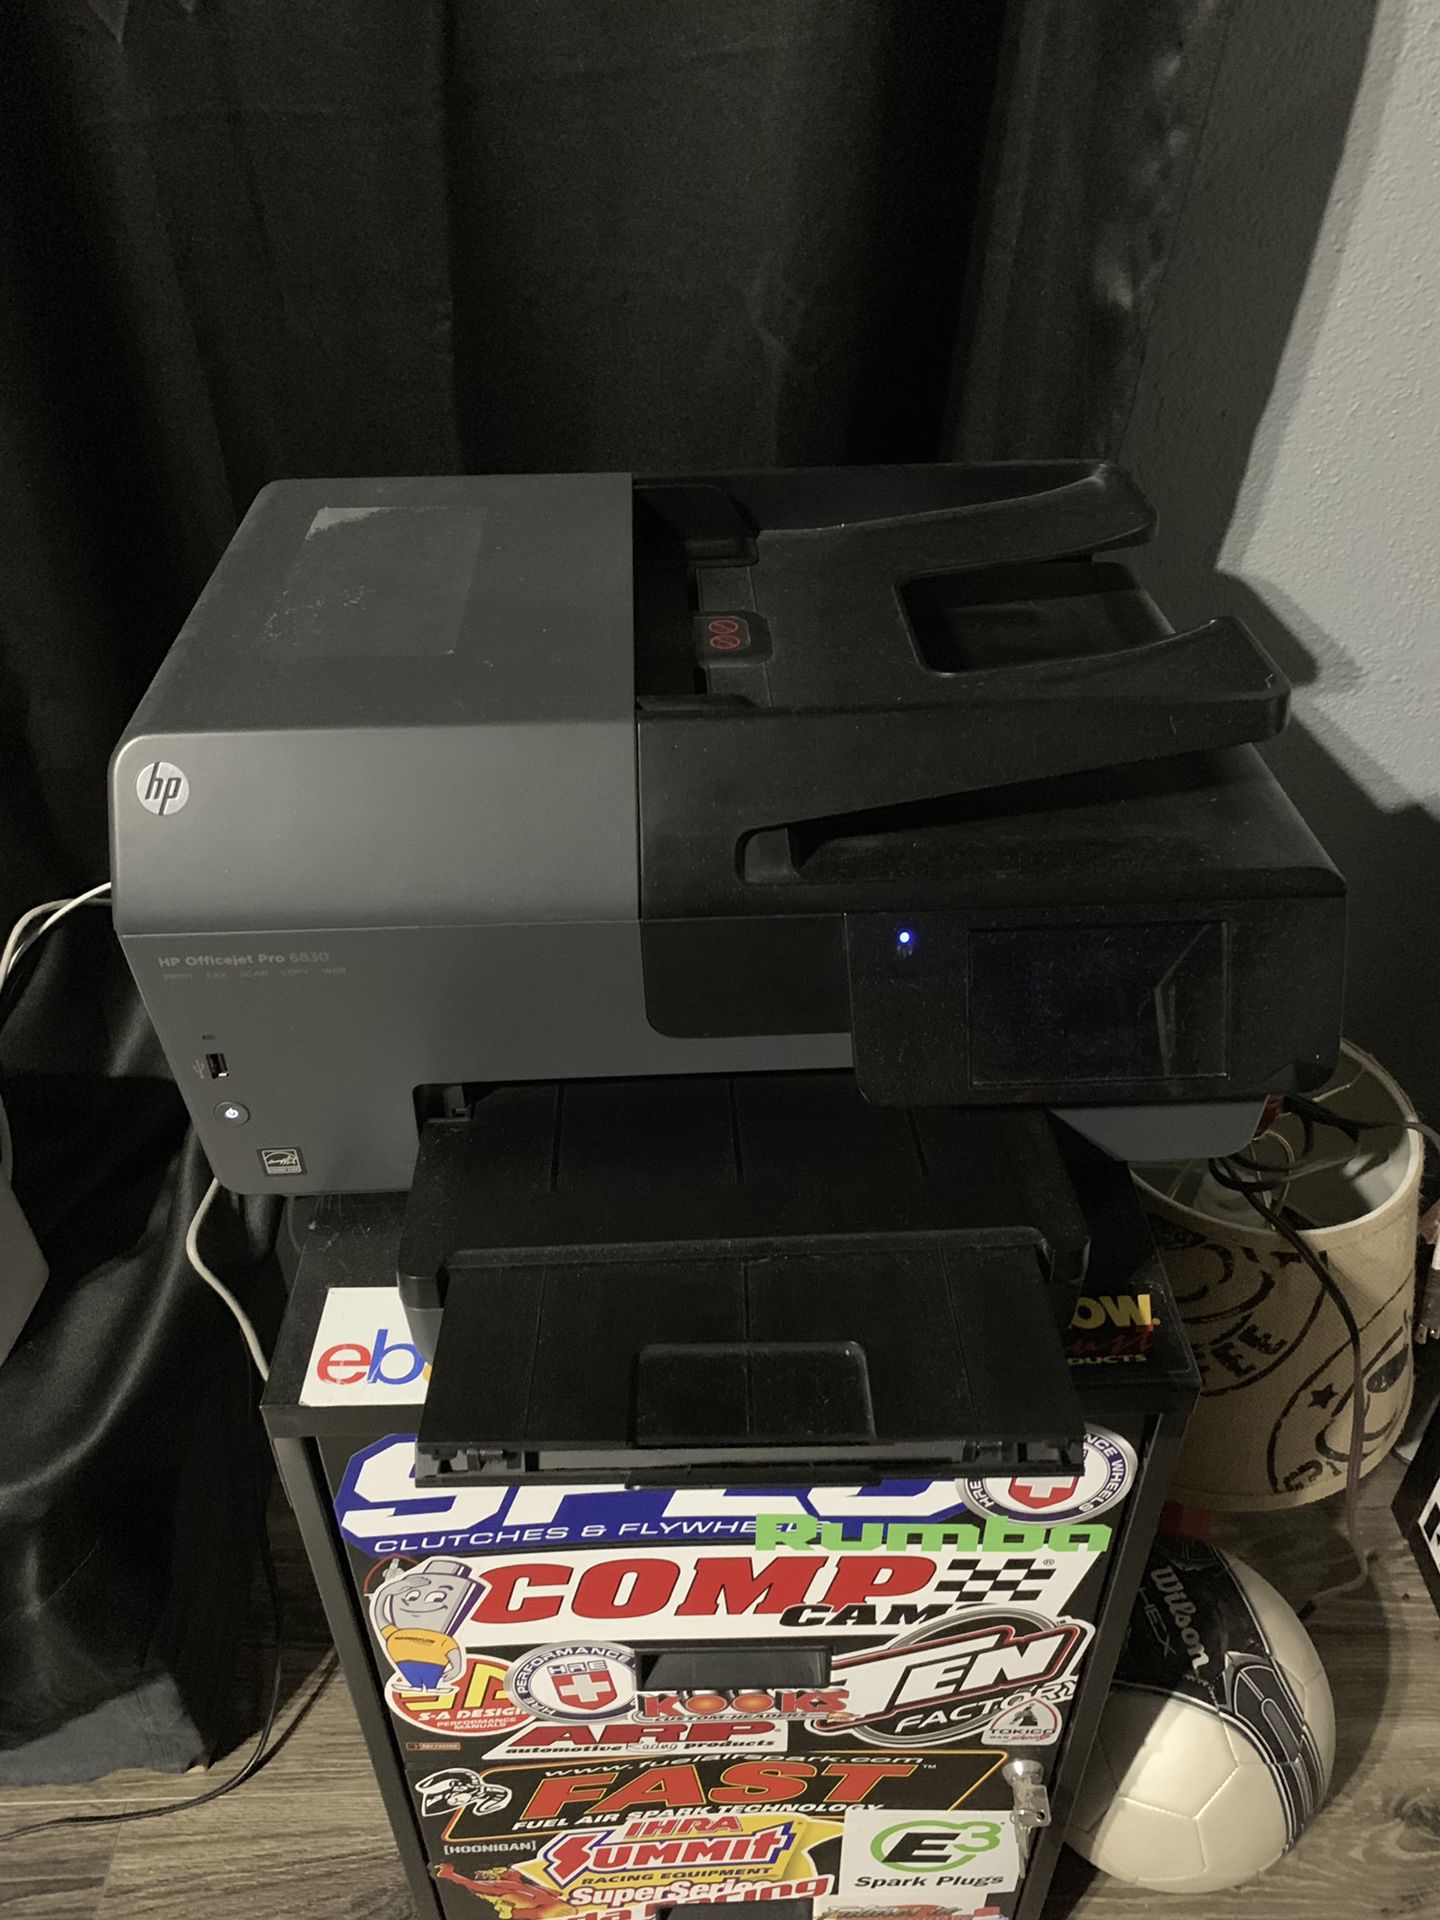 HP Officejet Pro 6830 printer, scanner, copier, fax, email